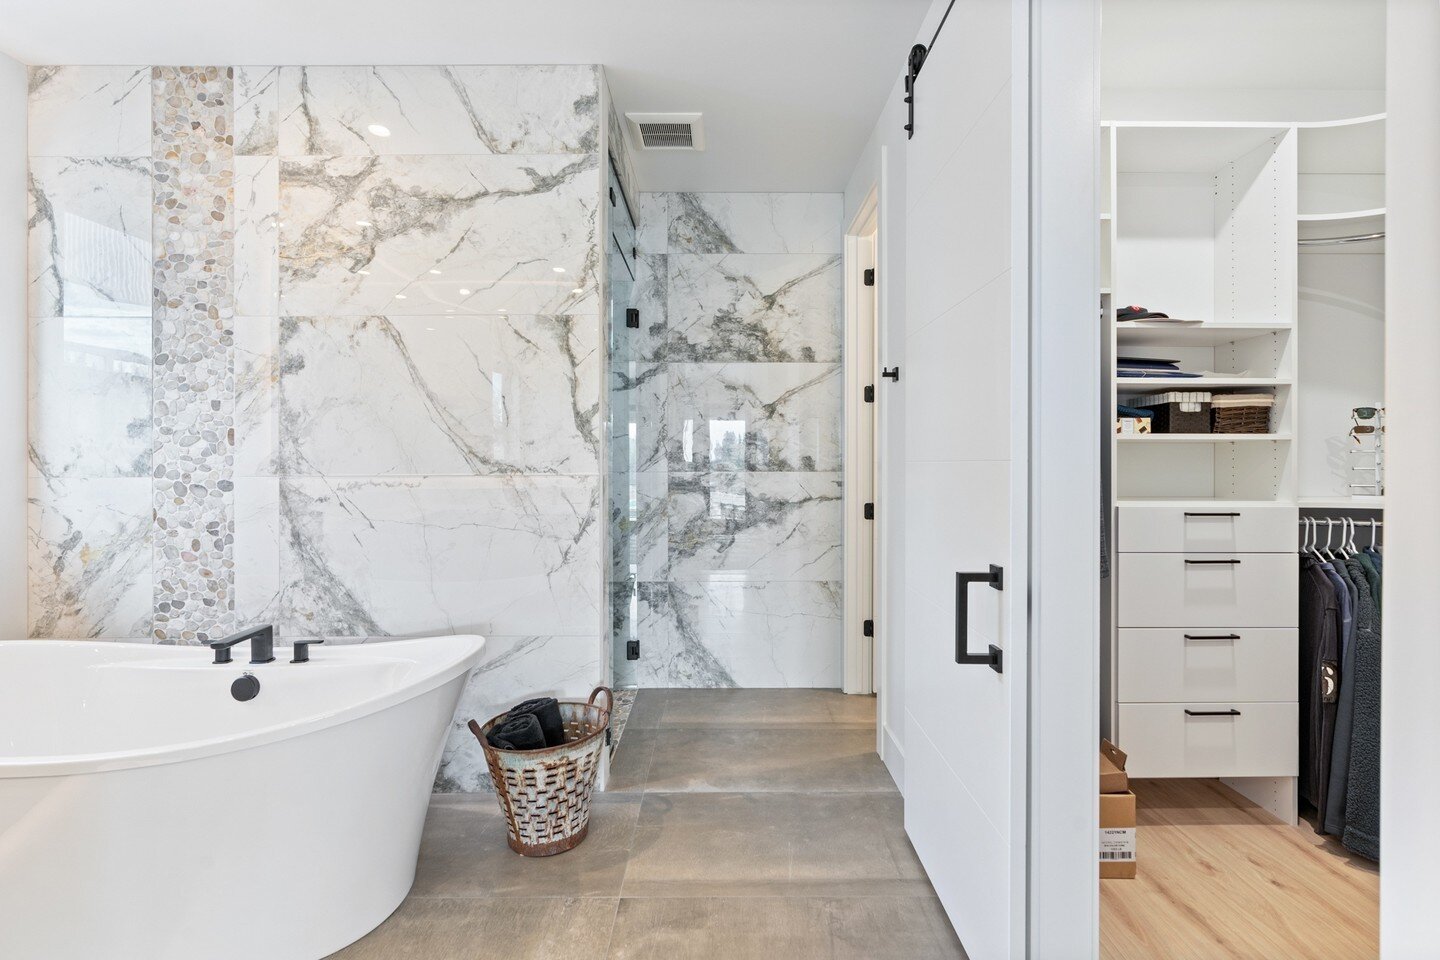 Spa content for your Monday morning 🛁⁠
⁠
Shout out to Lake Forest Design for the tile work in this Atlas Waterfront home, we love how light and airy this primary bath feels for an at home spa experience 🫧